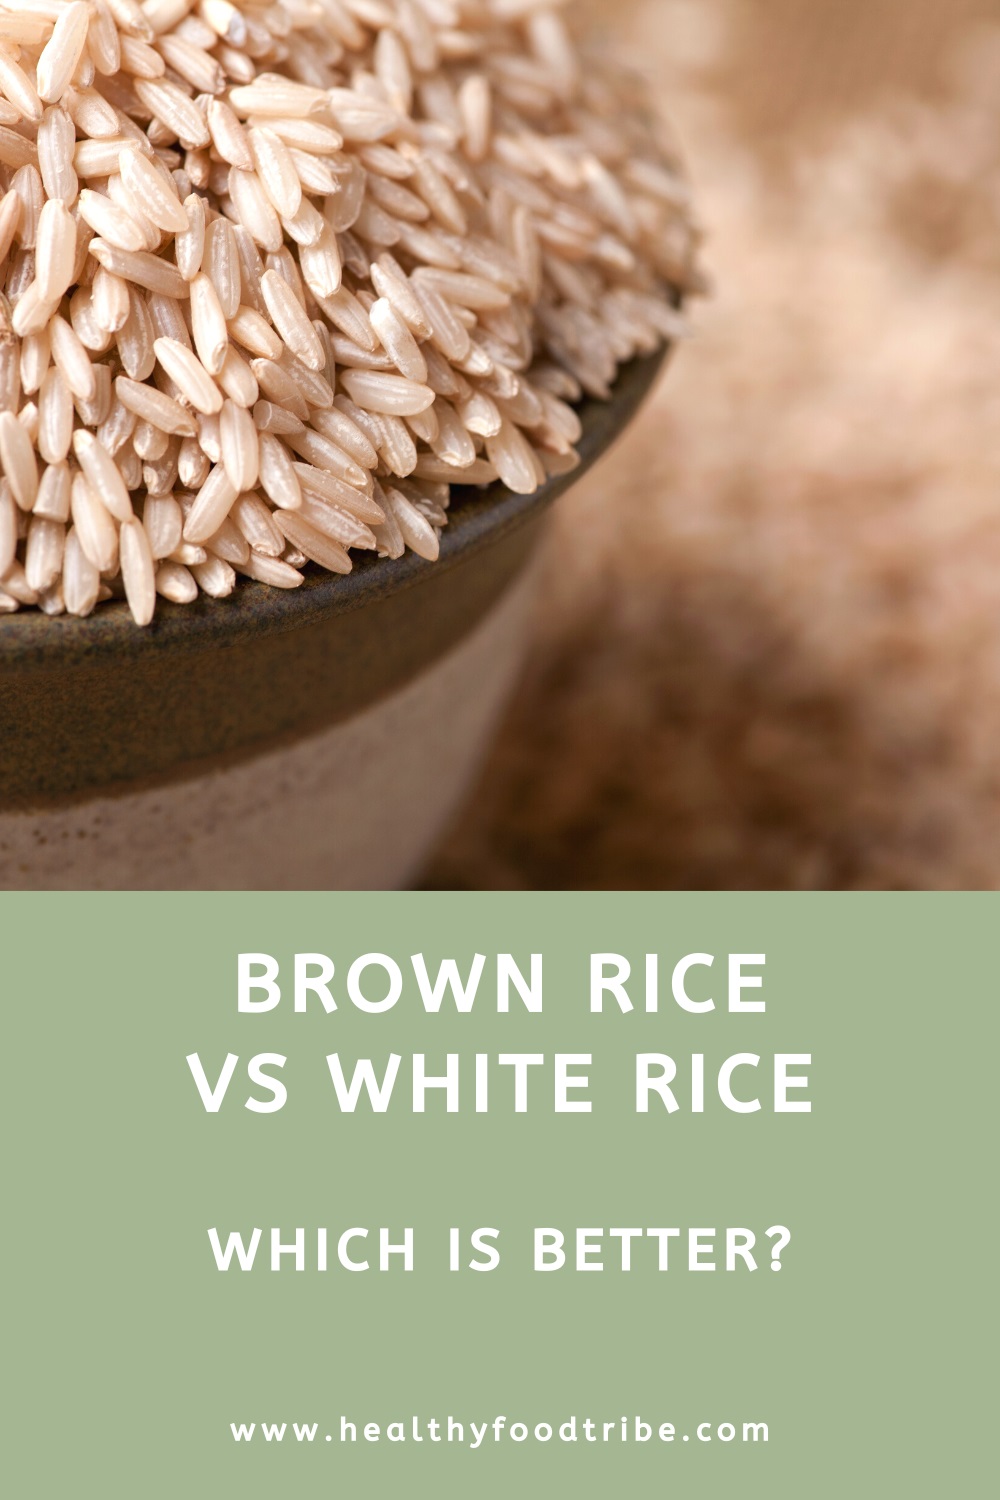 Brown rice vs white rice (which is better?)